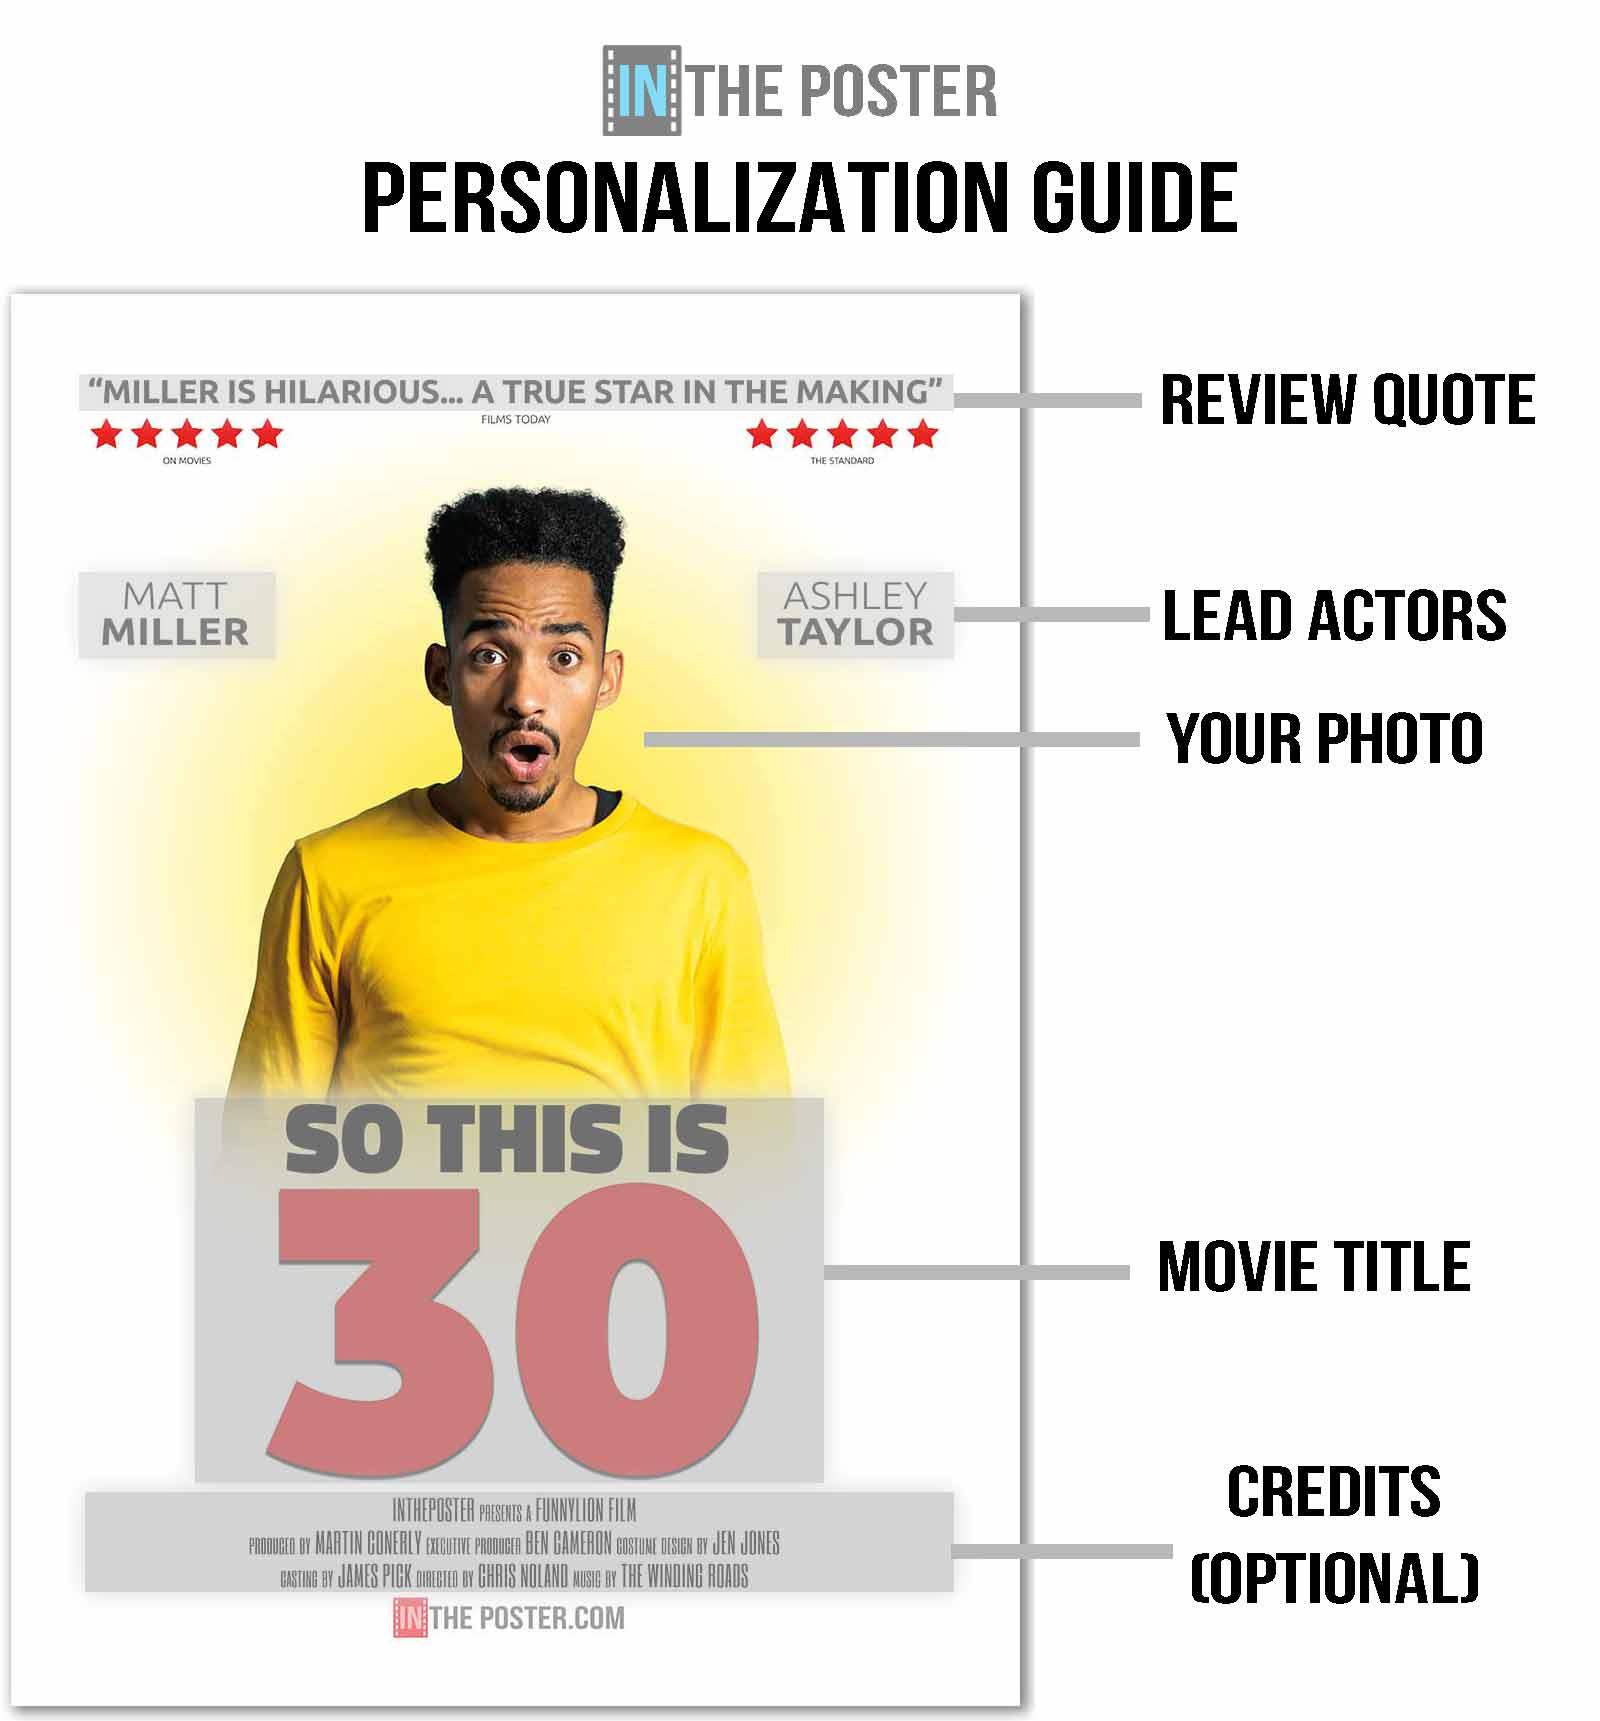 So This is 30 - Comedy movie poster diagram showing how to personalize.